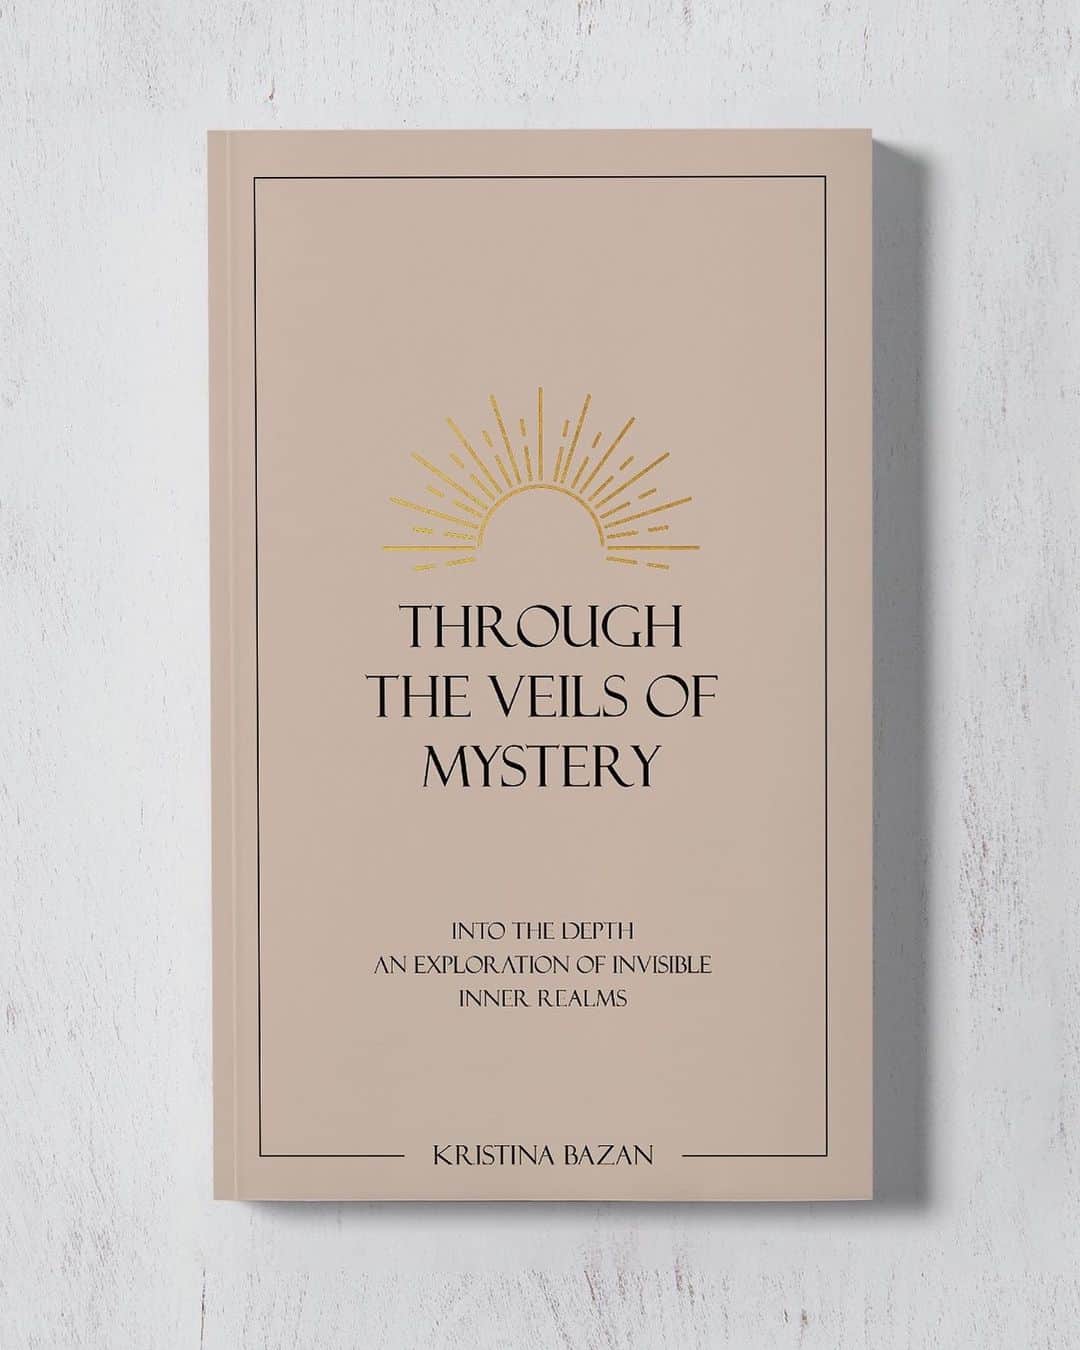 クリスティナ・バザンさんのインスタグラム写真 - (クリスティナ・バザンInstagram)「Here it is!!! My new book “Through the Veils of Mystery” is now available and ready to make it’s way to your bookshelf @thoughtcatalog @shopcatalog (link in bio)🪐✨🤍 In yesterday’s live I explained to you guys how much this book means to me and how it has been healing my heart for the last two years as channeled work, soothing my nervous system and stretching my belief system. There is so much I haven’t shared with you guys about what I went through end of 2019 simply because I felt like it needed the right frame to honor what occurred. In this book I reveal the details of what I call my “awakening process”. The second part of the book is an initiation through poetry into your own self revelation. It is structured in a way to access the subconscious mind and retrieve lost memories. Many of you have witnessed a massive transformation in my life and it’s true. I’ve reconnected with parts of myself which I had lost, which were broken and fragmented. The words of this book came through higher planes as pure medicine when my soul was ready to receive it, soothing my wounds and applying healing balm onto them. “Through the Veils of Mystery” is a divine reclamation of our power. The power we gave away, to lovers, friendships, careers, family members. This book is a profound healing template and support for those ready to truly meet themselves : all of themselves and to face the truth of their divinity. To make peace with that word beyond any and all dogma. The words of this book have been healing me in such profound ways and I know they will find those that are meant to read it. Those ready to heal and rise in oneness. Thank you @thoughtcatalog for believing unequivocally in this book and it’s gentle yet fierce transformative power. I am the humble messenger of this text, and it is an honor to share it now with you as it has been shared onto me through the invisible realms 🤍   Get your copy at shopcatalog.com or amazon.com/amazon.uk/amazon.fr/amazon.de/etc. 💌  DM me if you need help to get your copy ❤️  #ThroughtheVeilsofMystery」2月3日 2時04分 - kristinabazan